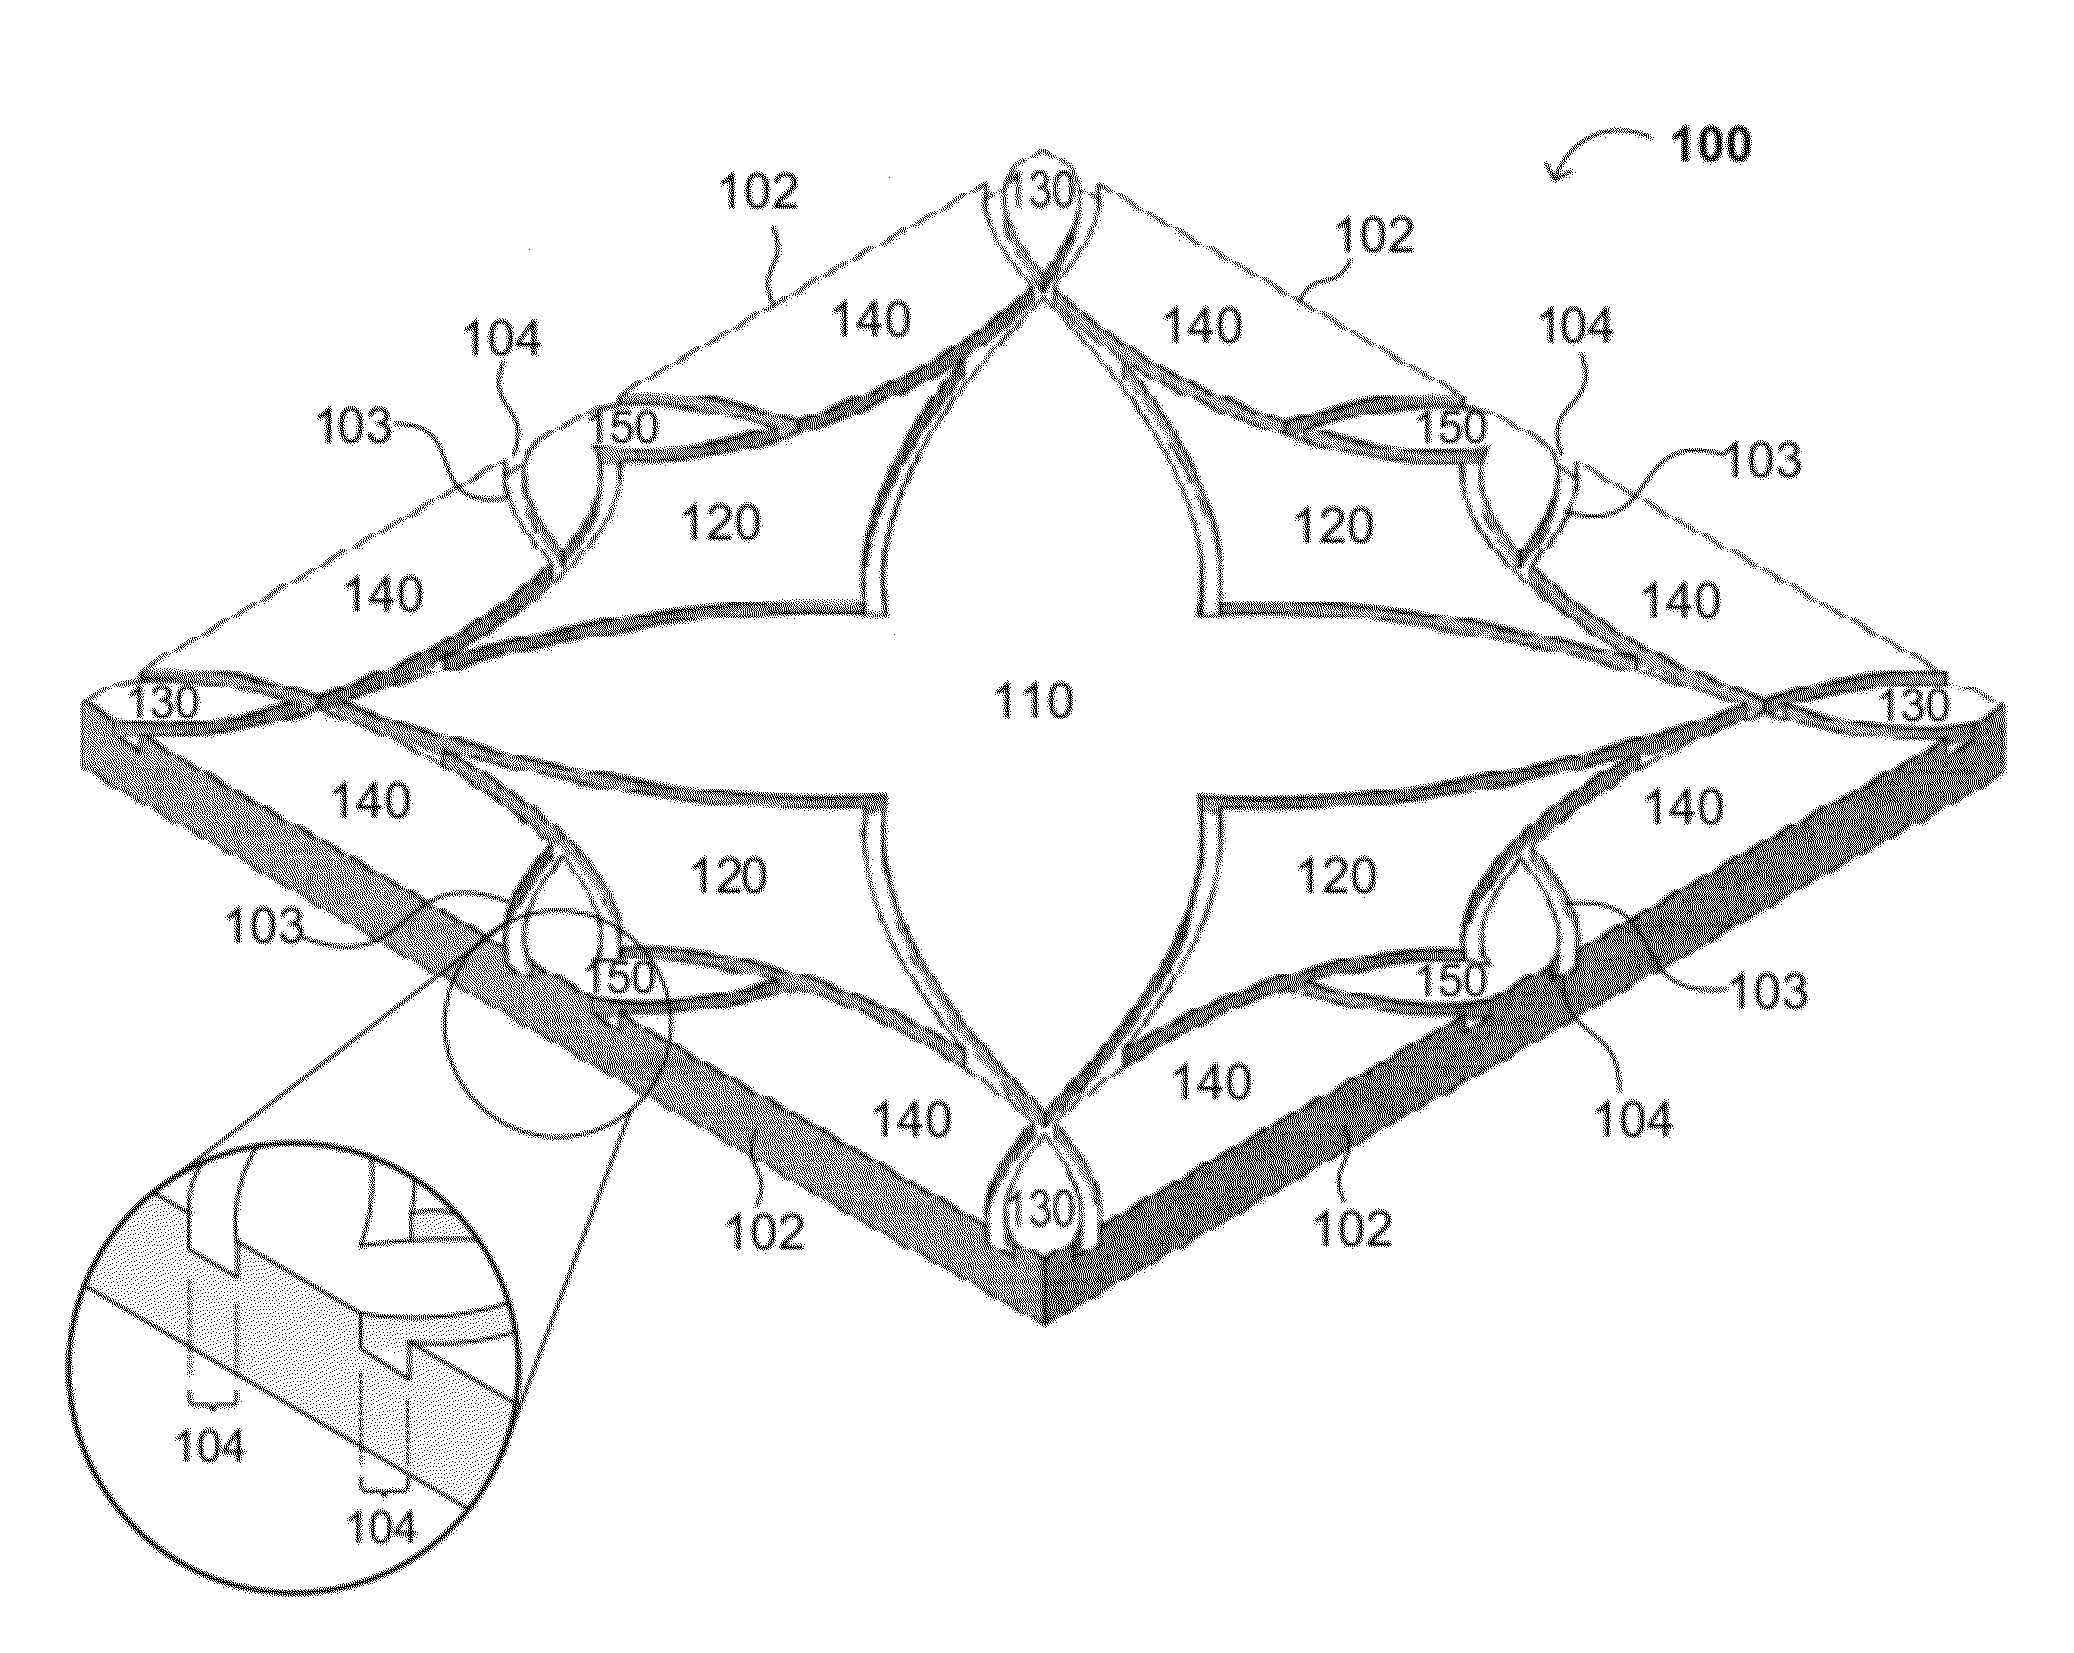 Grooved Tiles, Grooved Tile Assemblies and Related Methods